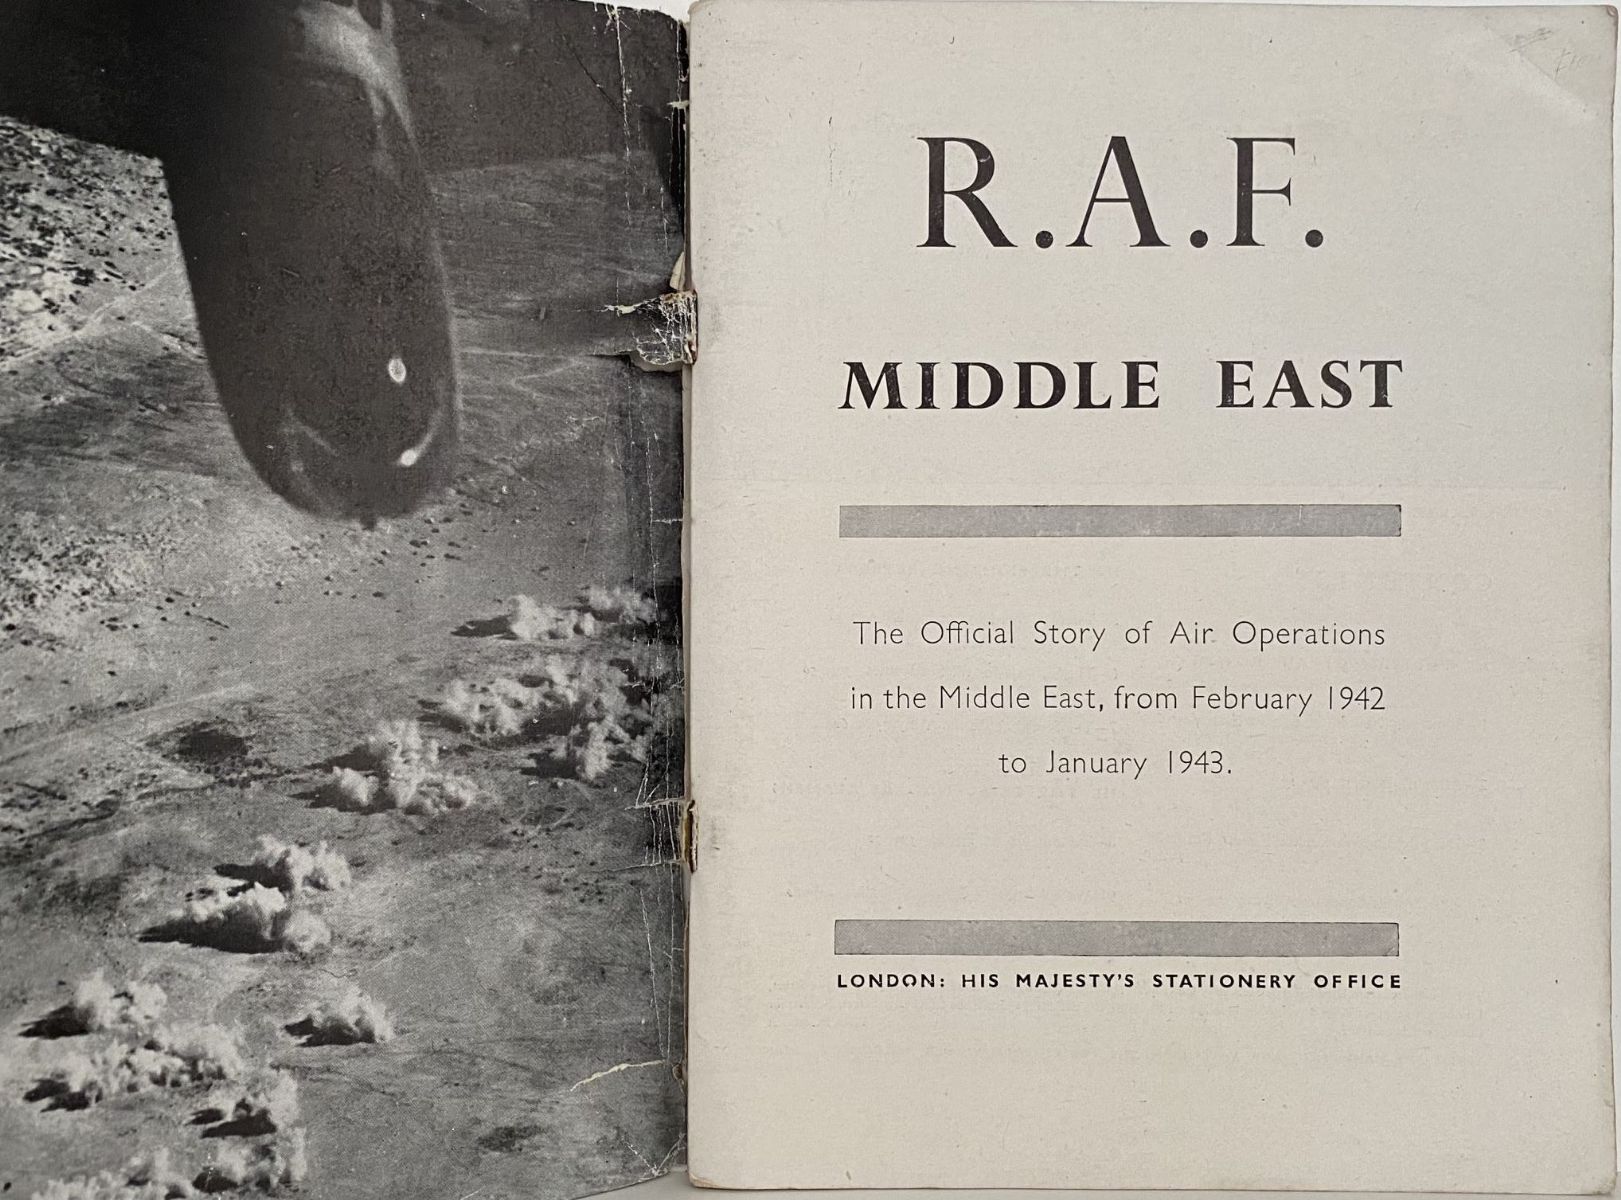 R.A.F MIDDLE EAST: The Story of Air Operations in the Middle East 1942-1943